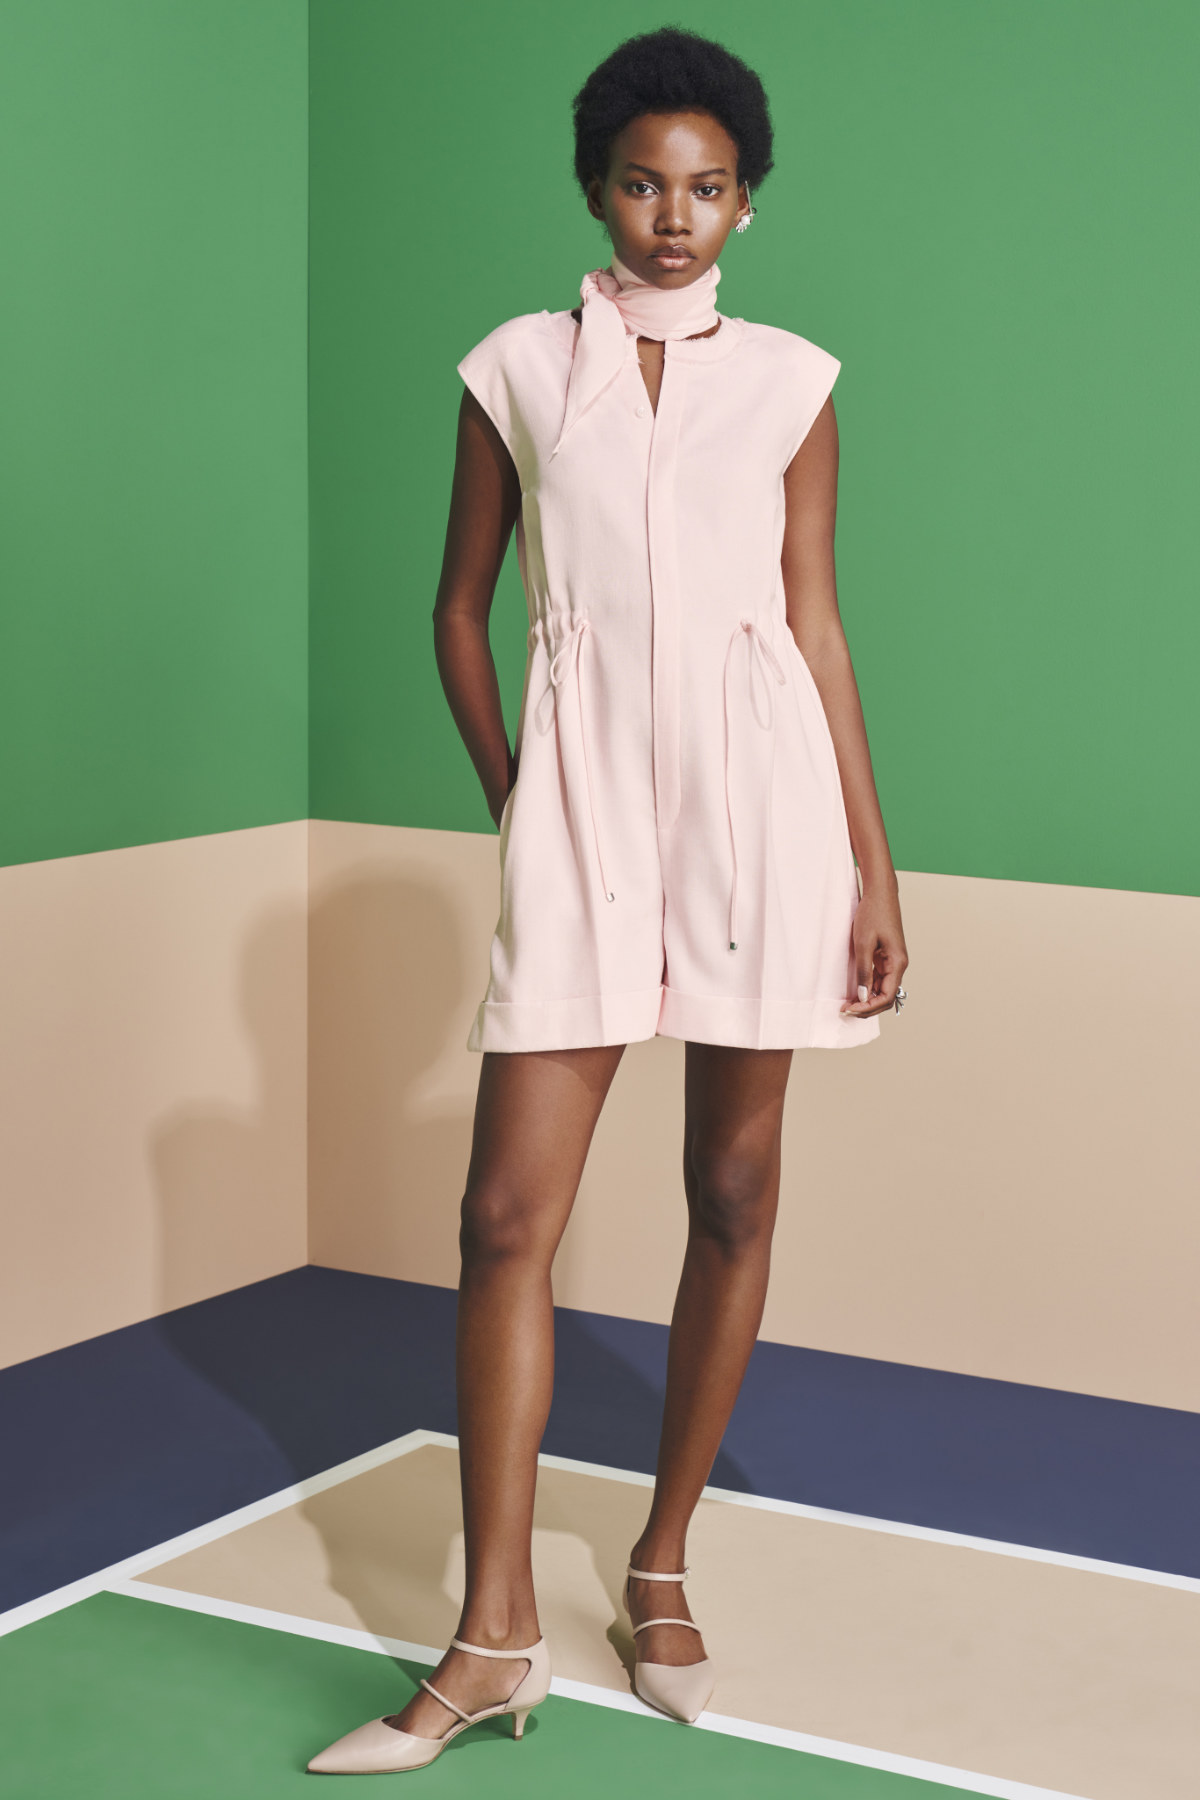 ADEAM Presents Its New Pre-Fall 2023 Collection